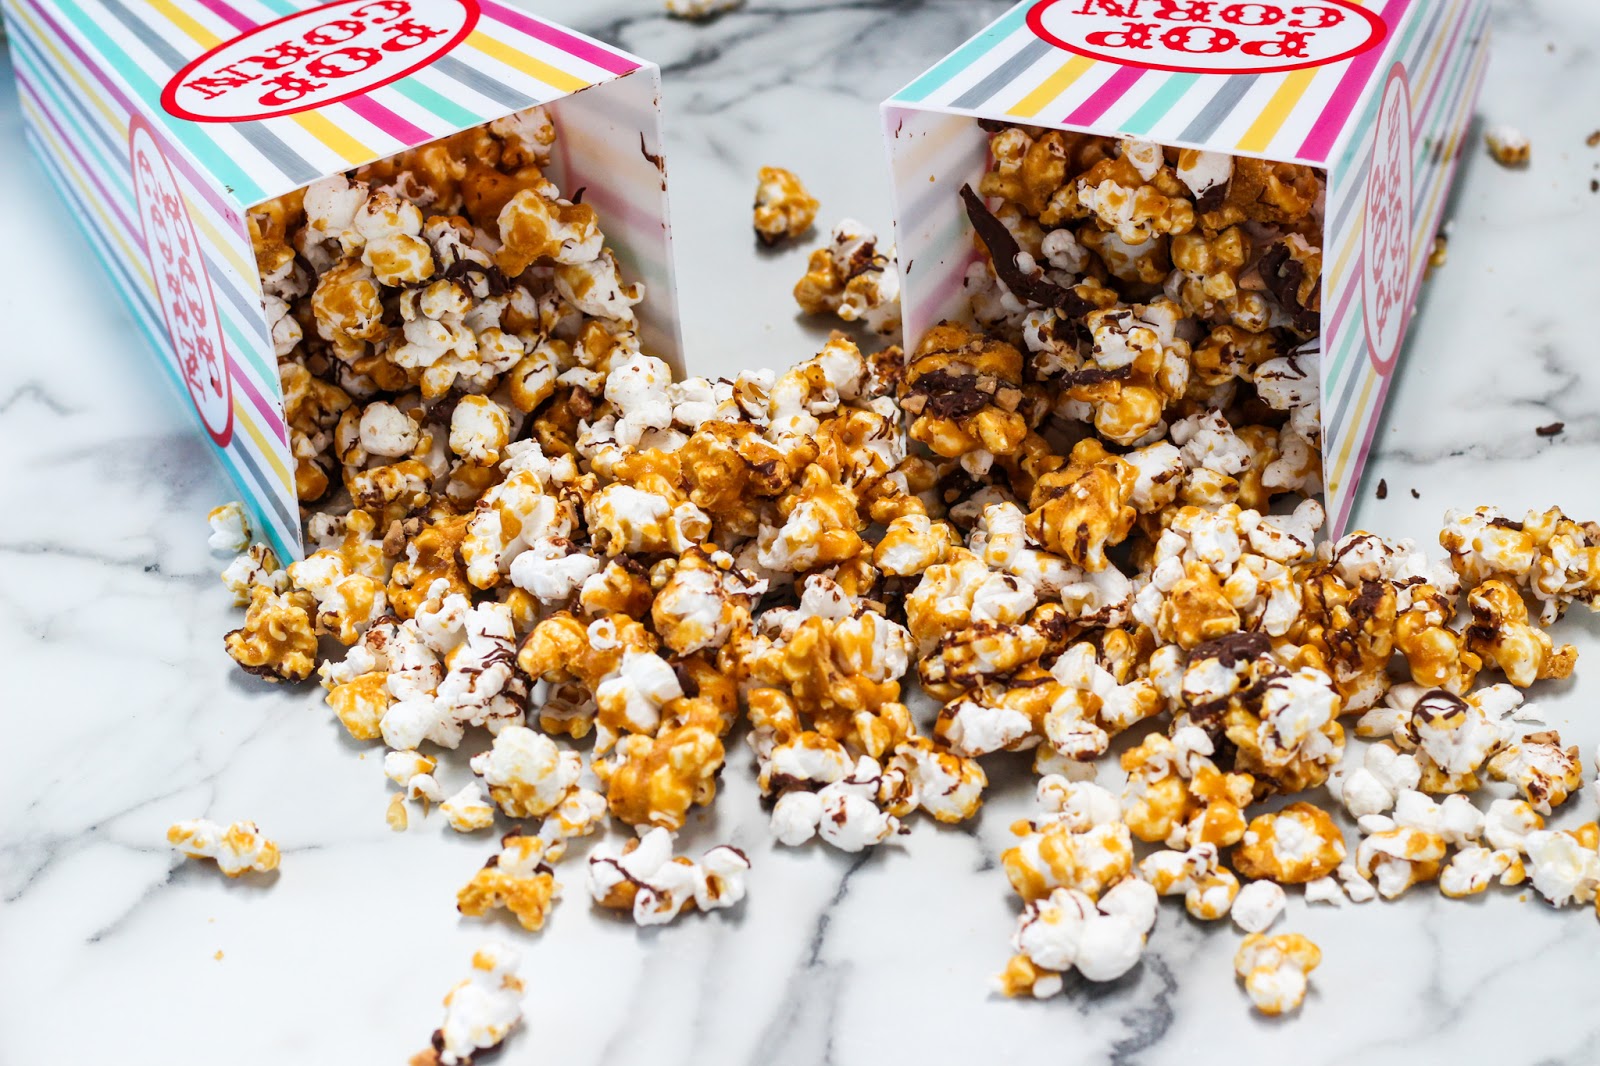 How to Make the Most Delicious Chocolate Toffee Popcorn